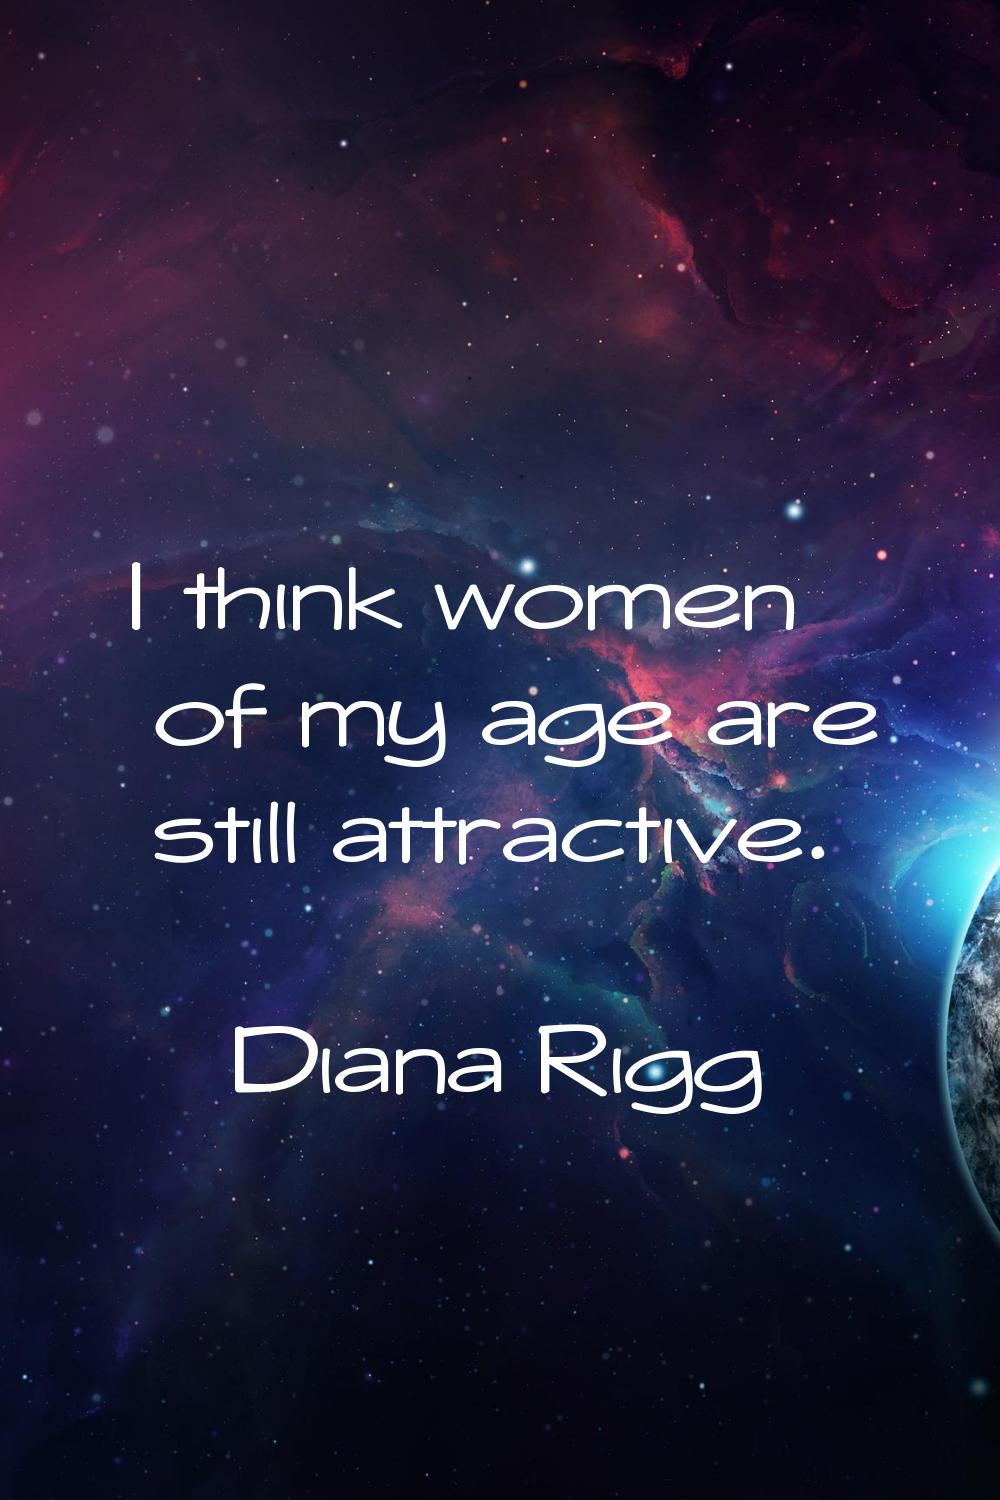 I think women of my age are still attractive.